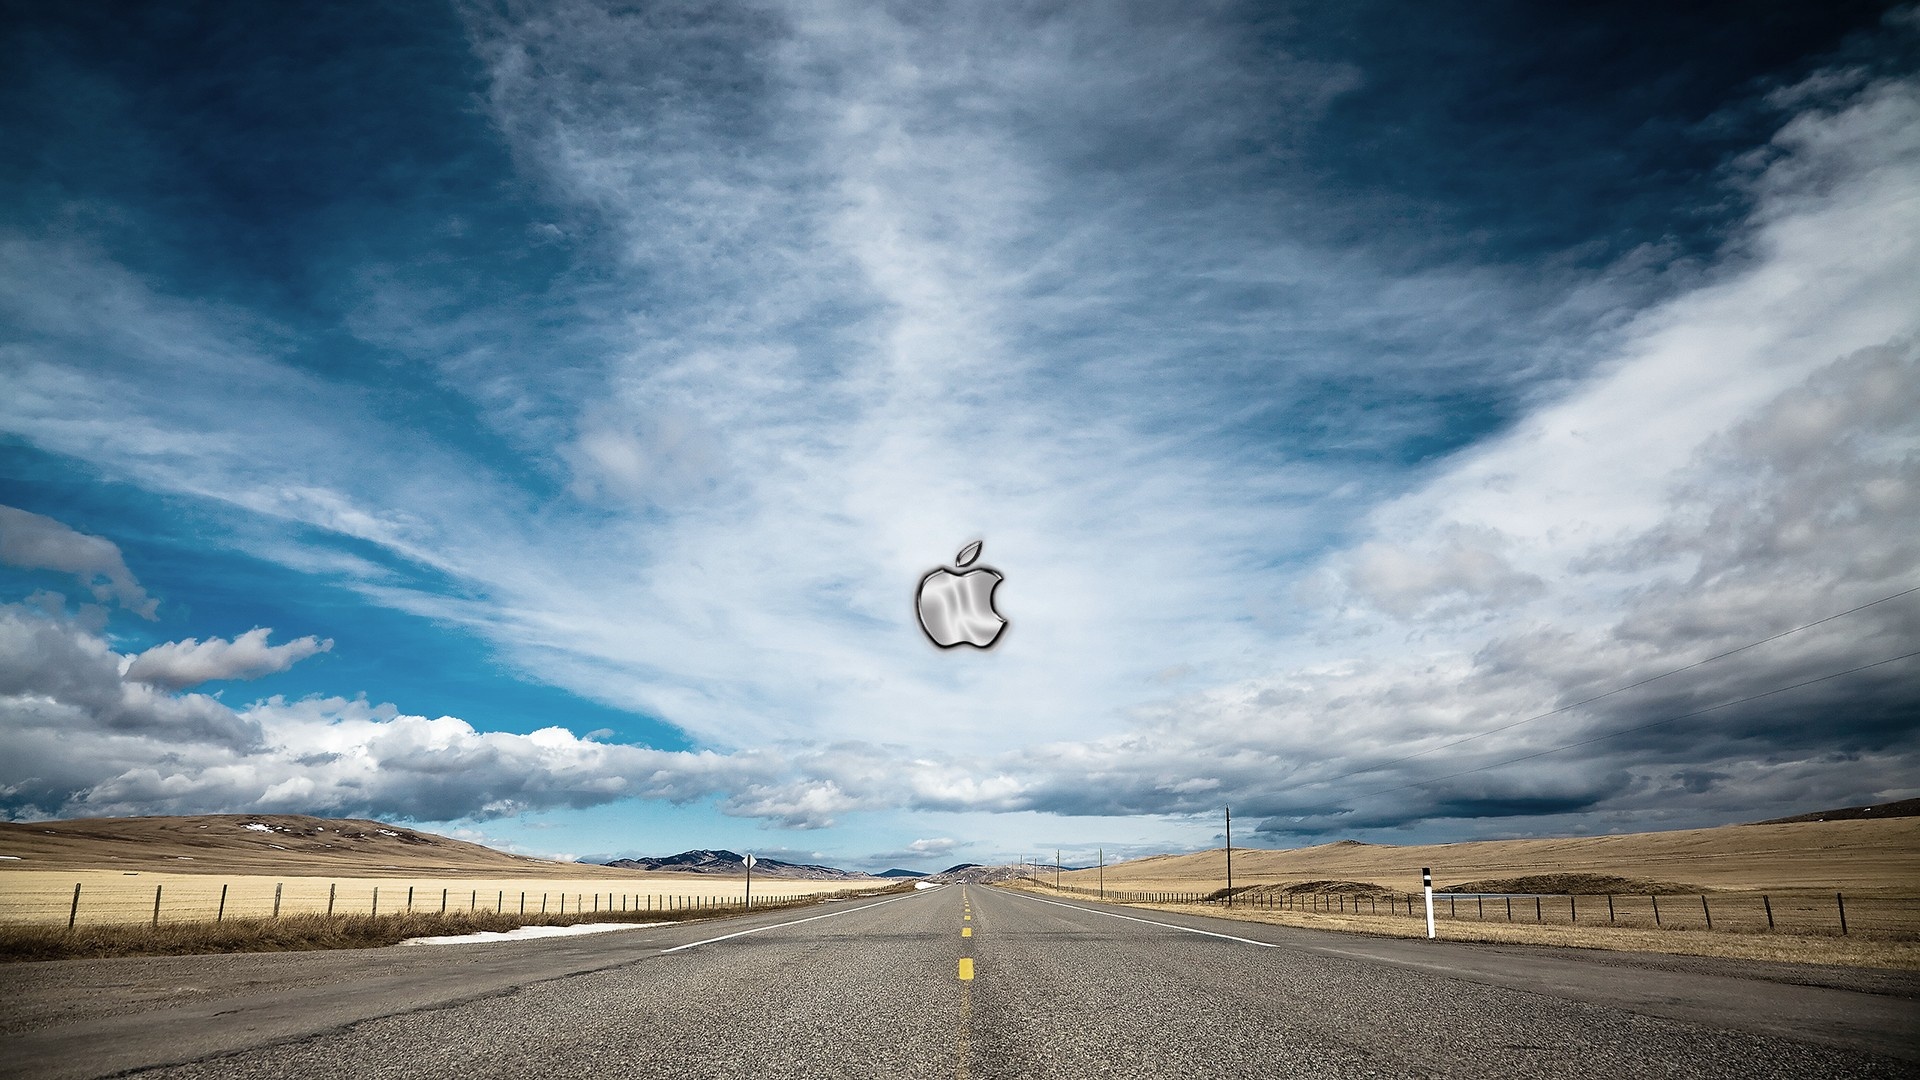 15 Cool Apple Wallpapers for Mac,iPhone and iPad